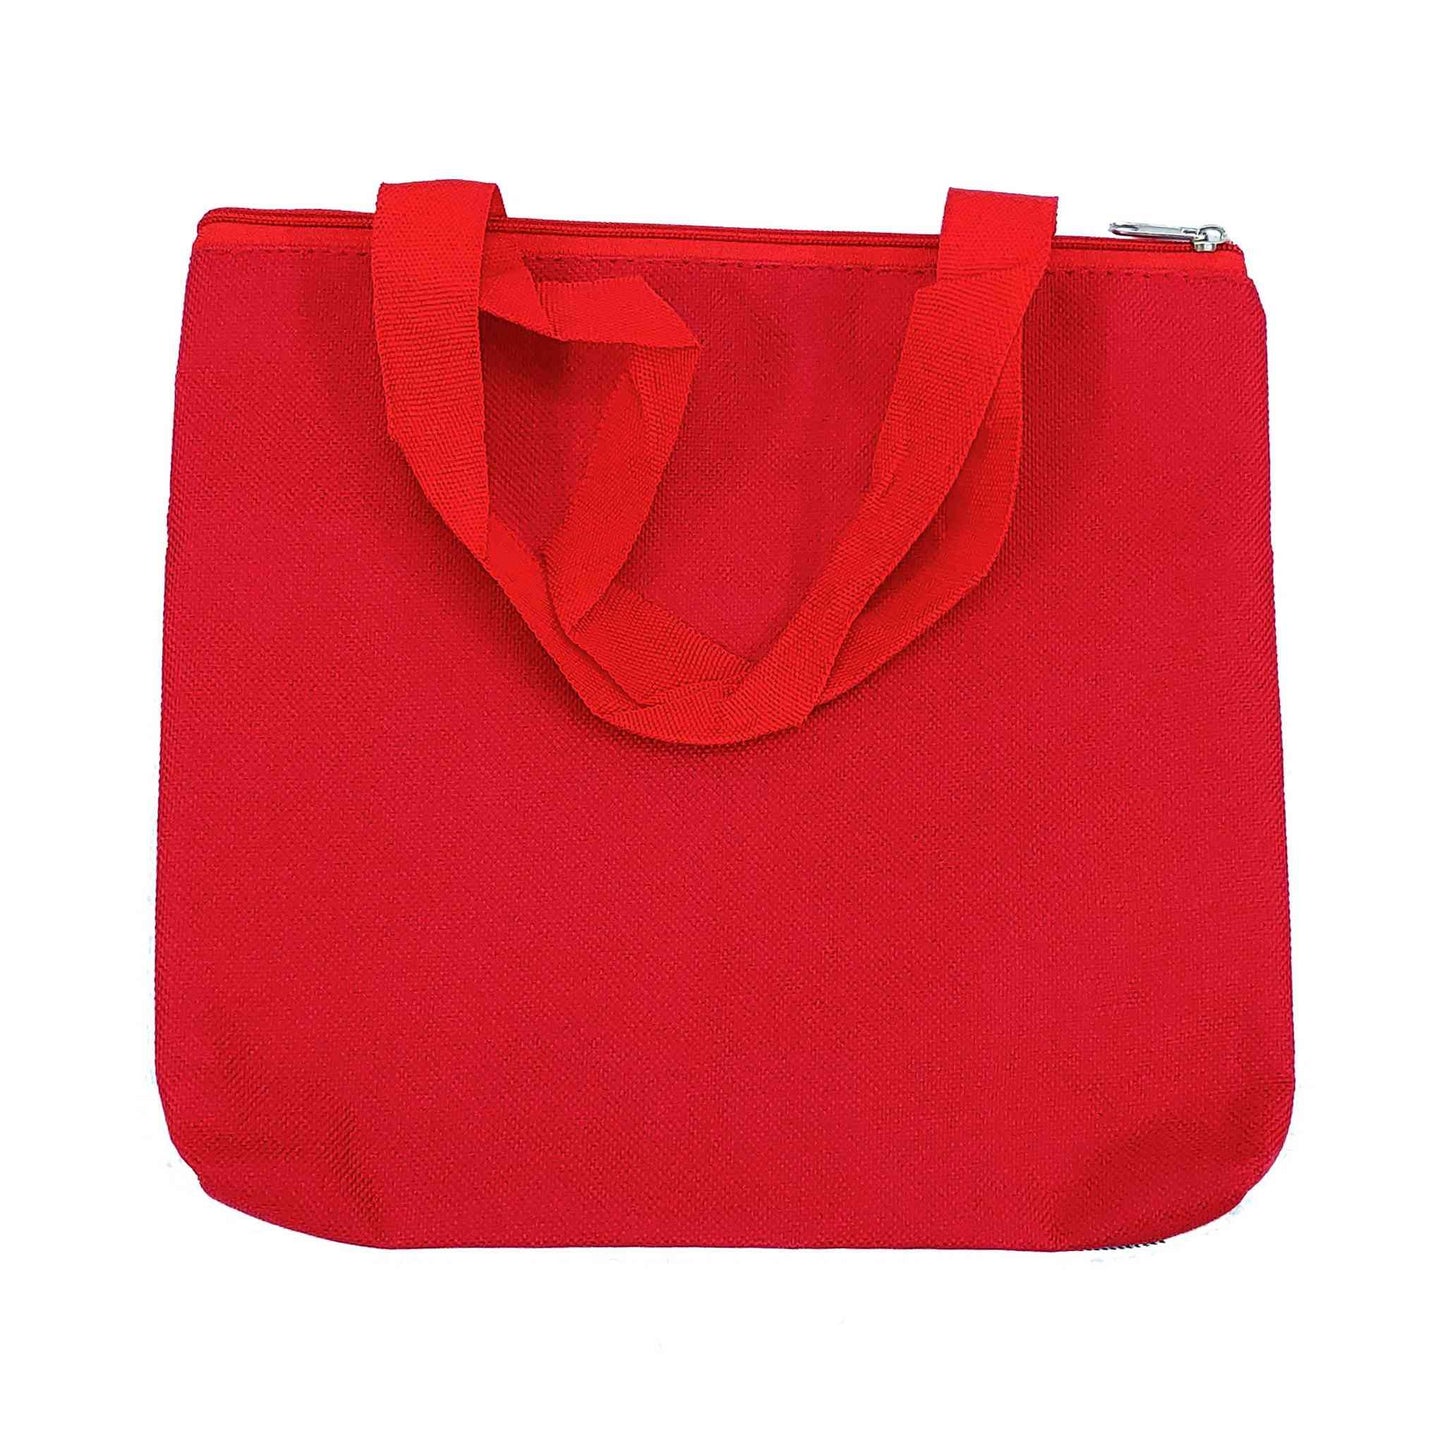 Indian Petals Imported Durable Canvas Printed multi purpose utility Medium size Bag with handles for all occasions for the girls and ladies, Design 2, Red - Indian Petals